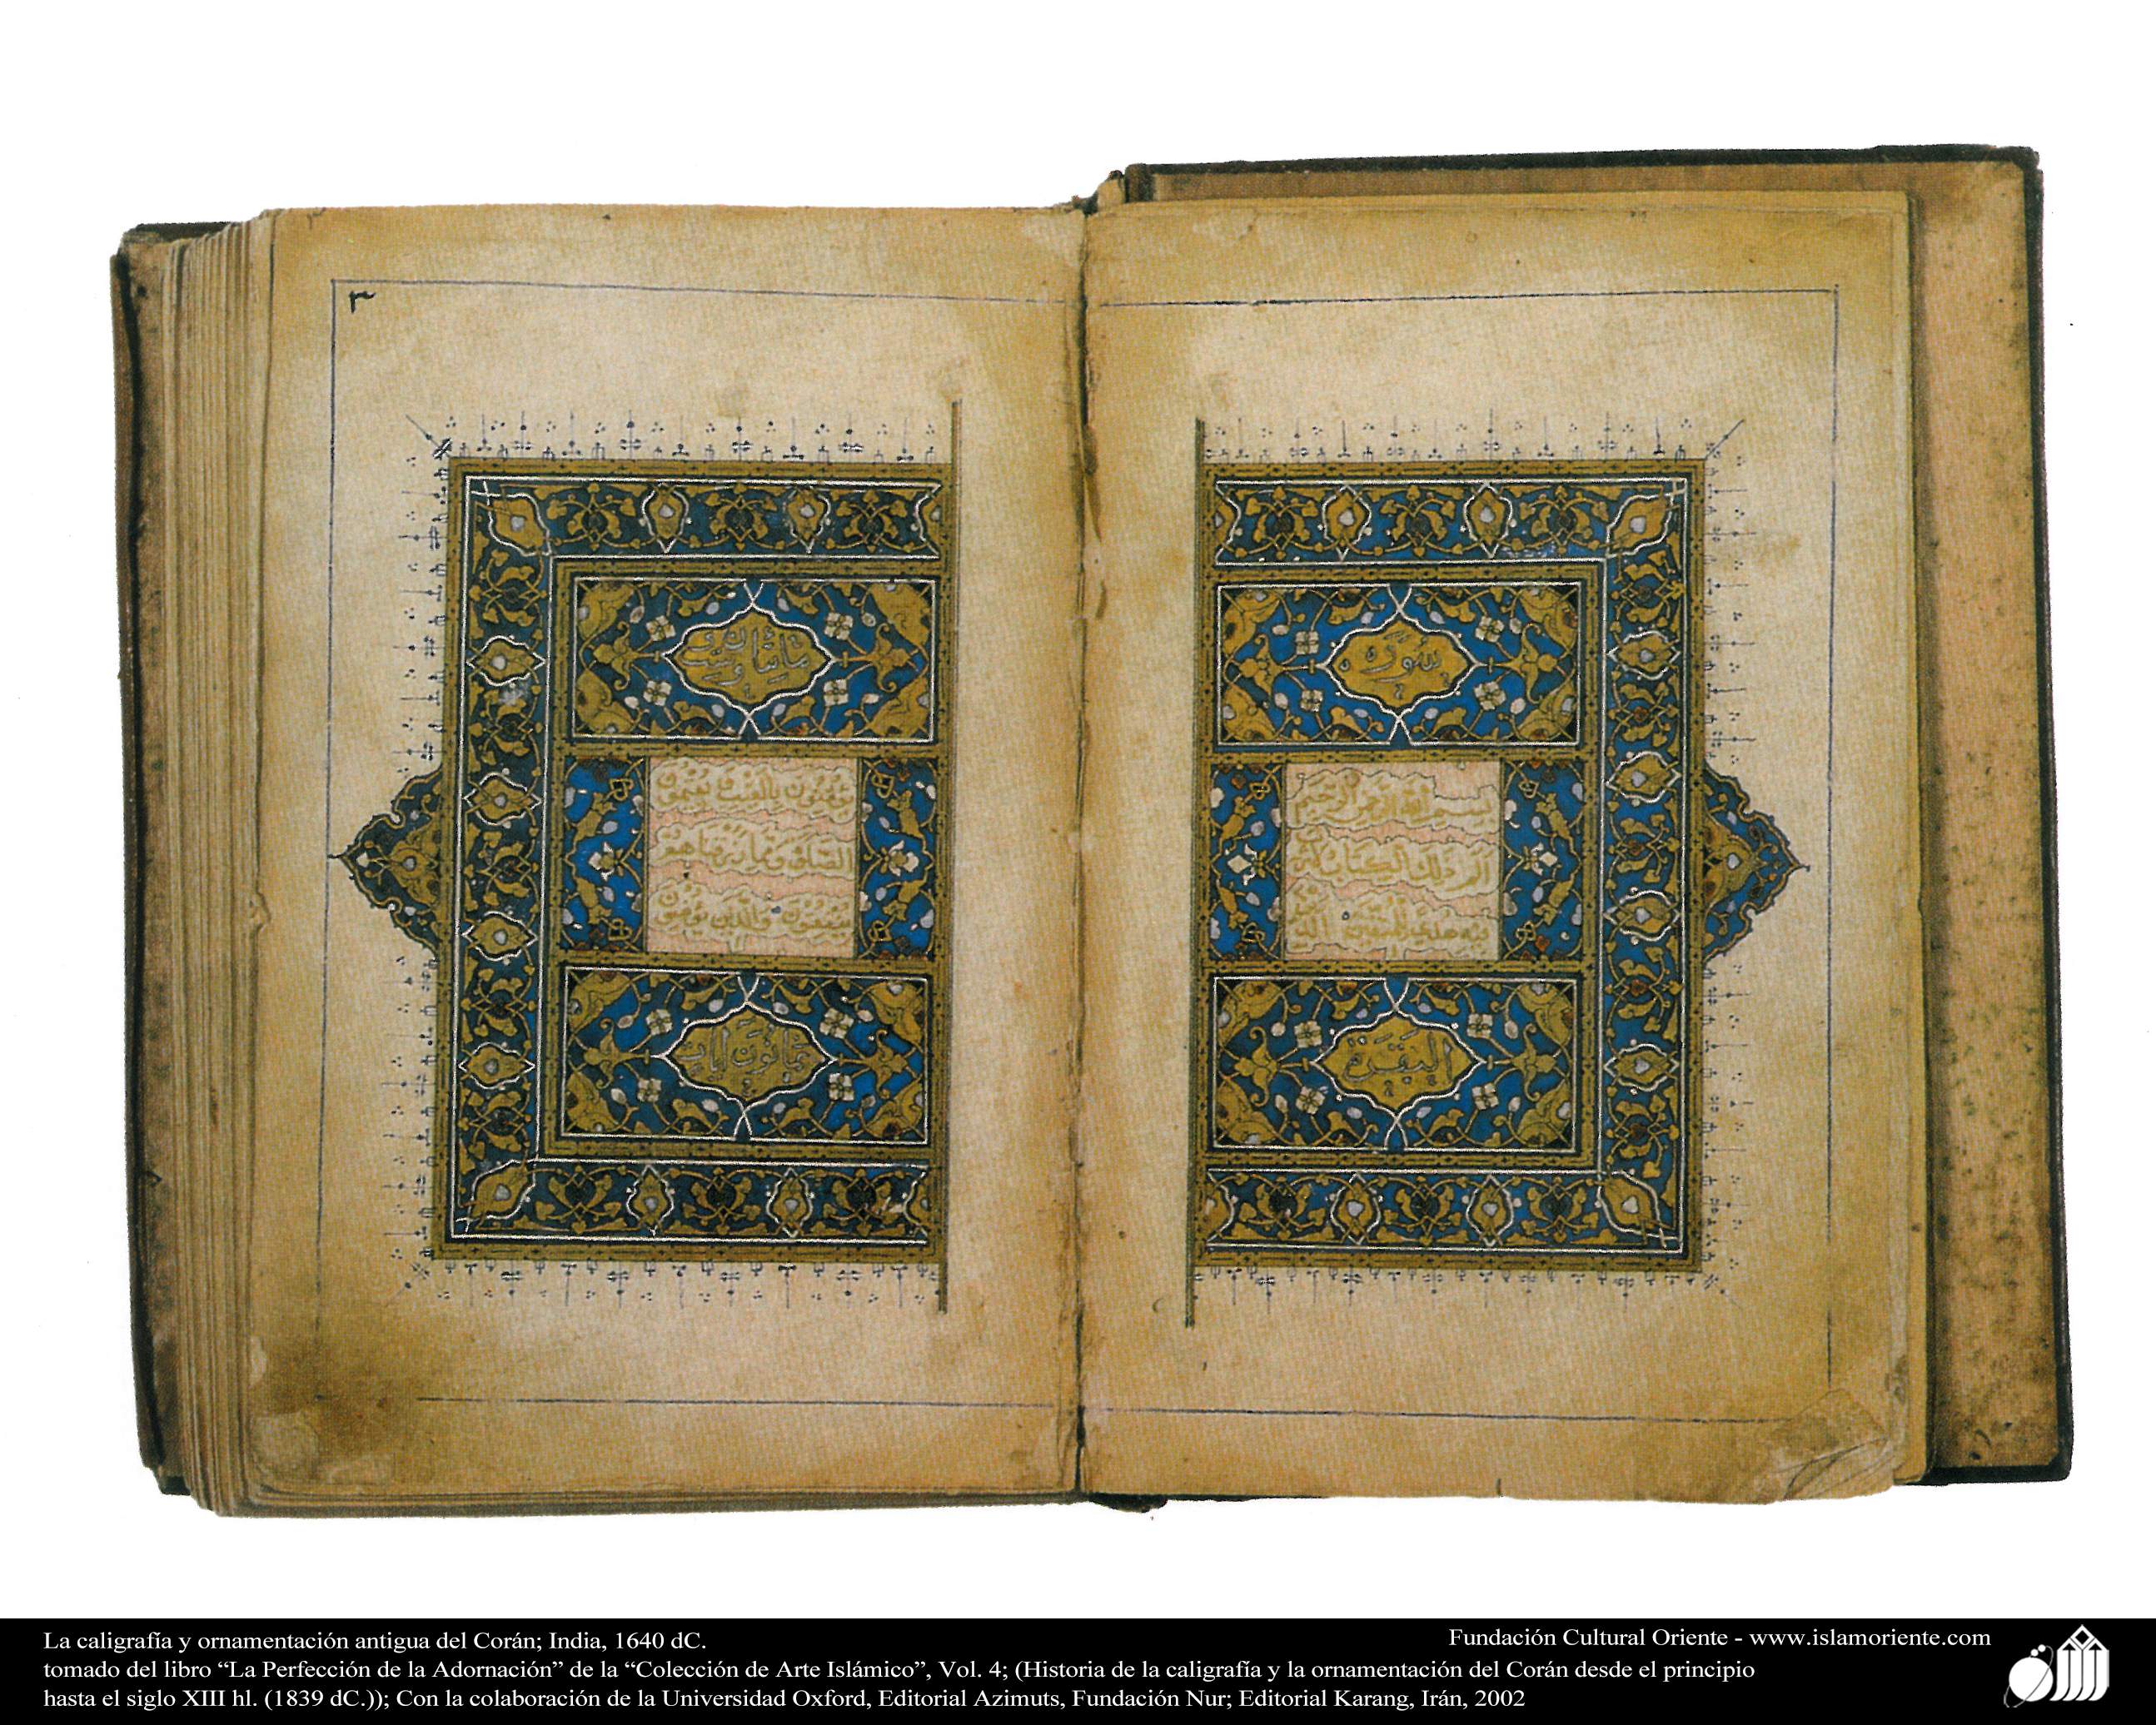 tazhib (ornamentation of valuables pages and texts)